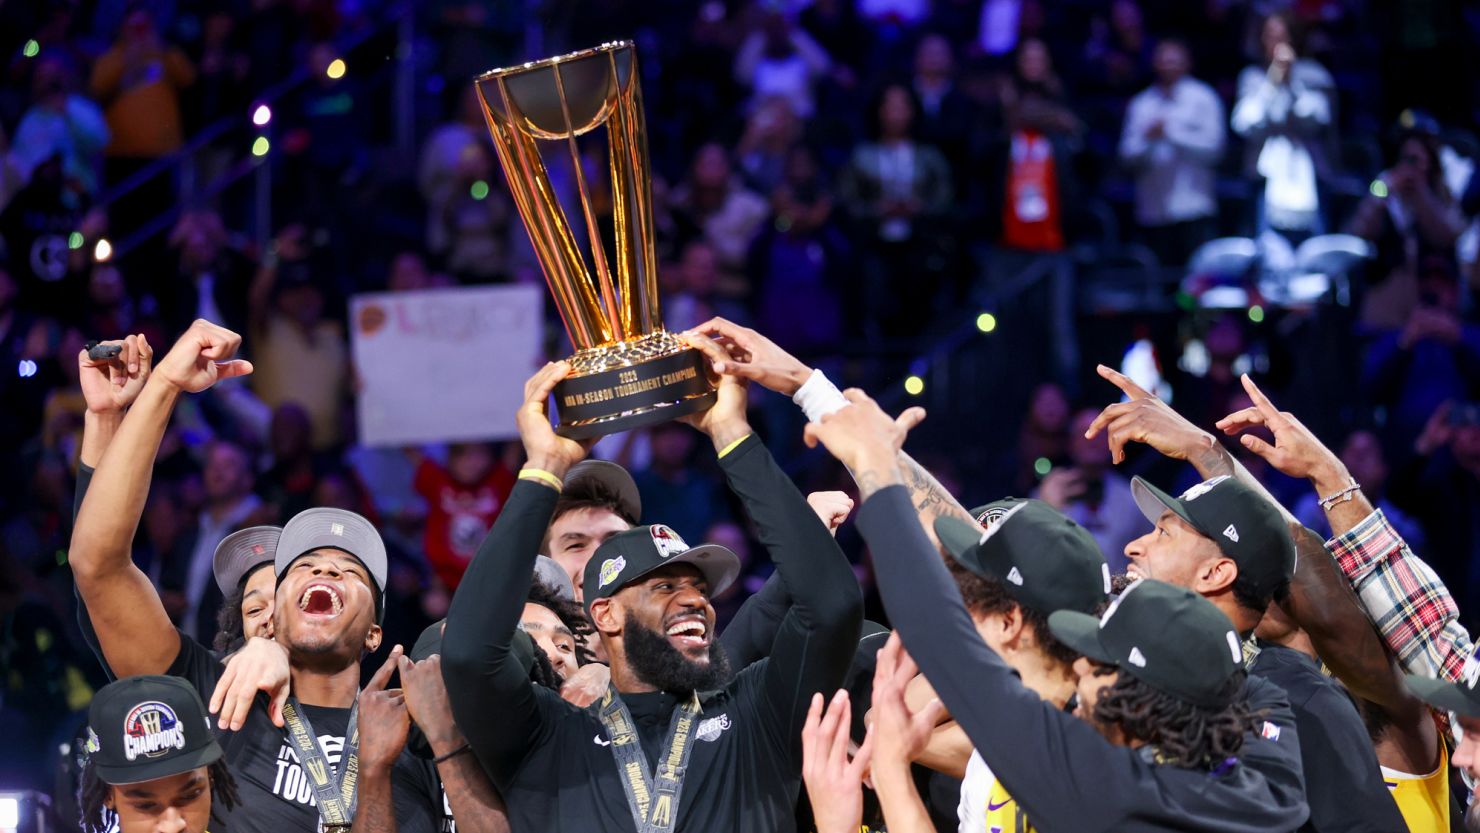 Another professional sports team in Los Angeles won a championship